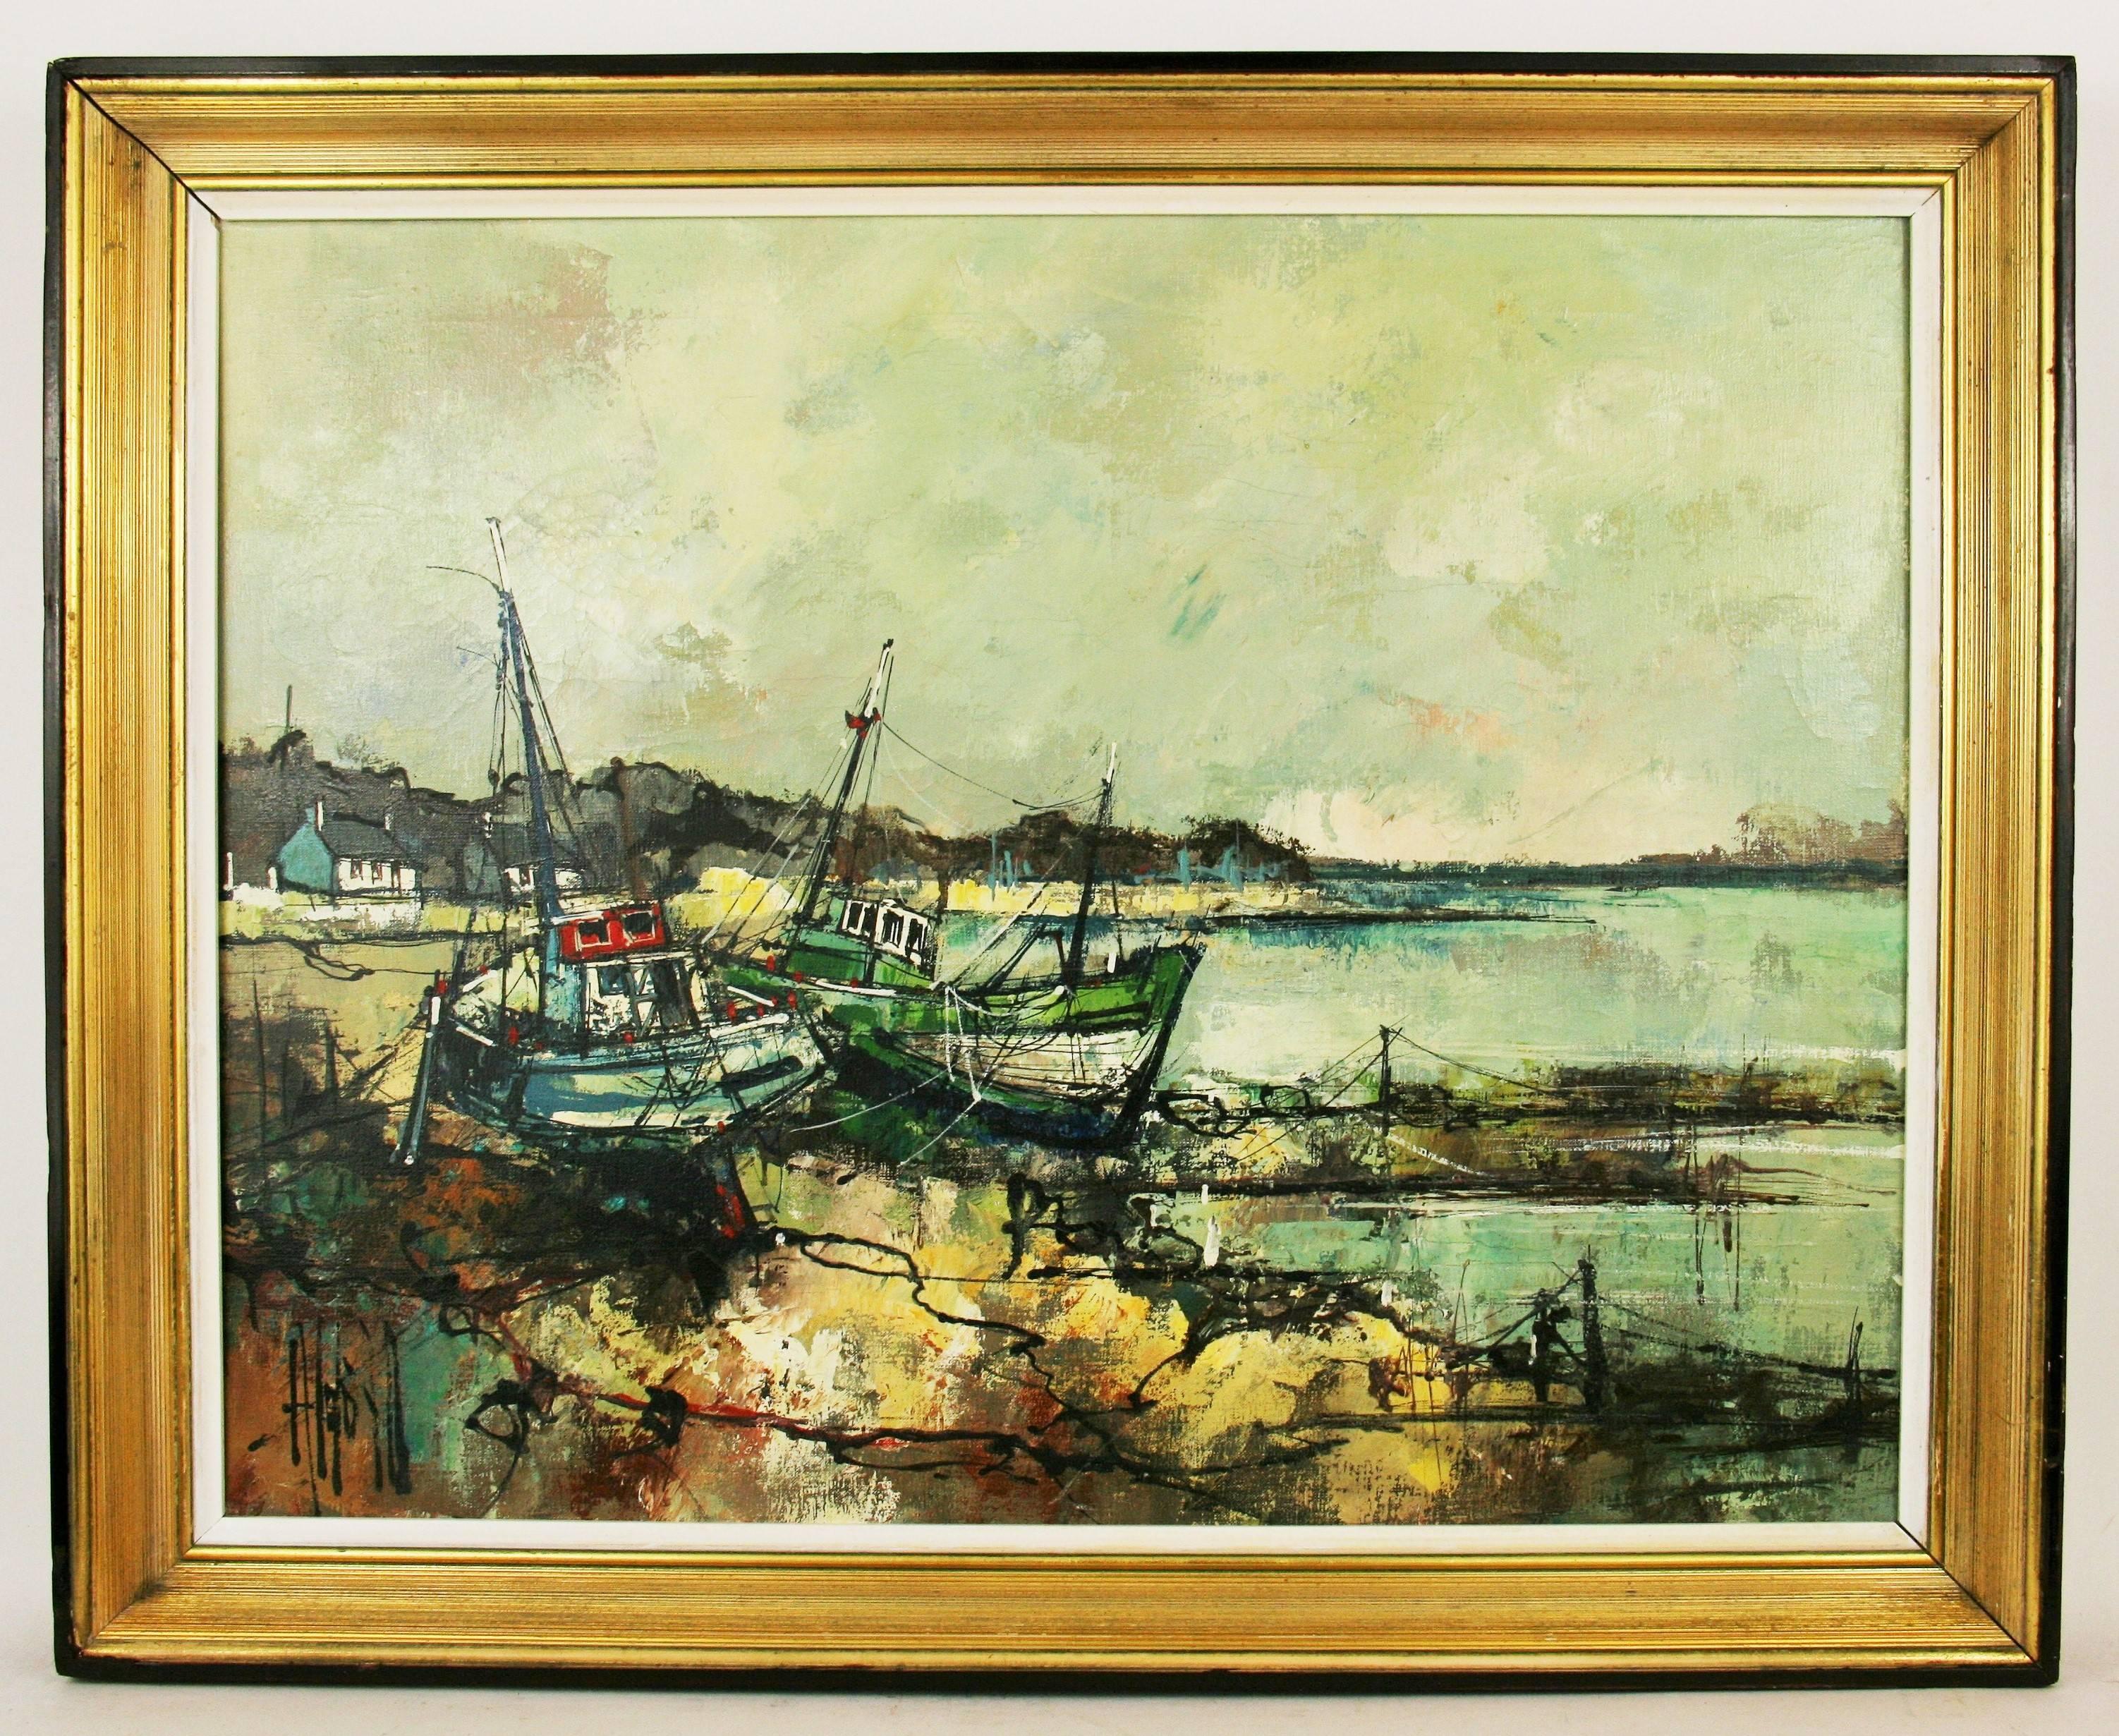   Impressionist Fishing Boat in a Harbor Scene Seascape by A.Luongo 1940 - Painting by Aldo Luongo